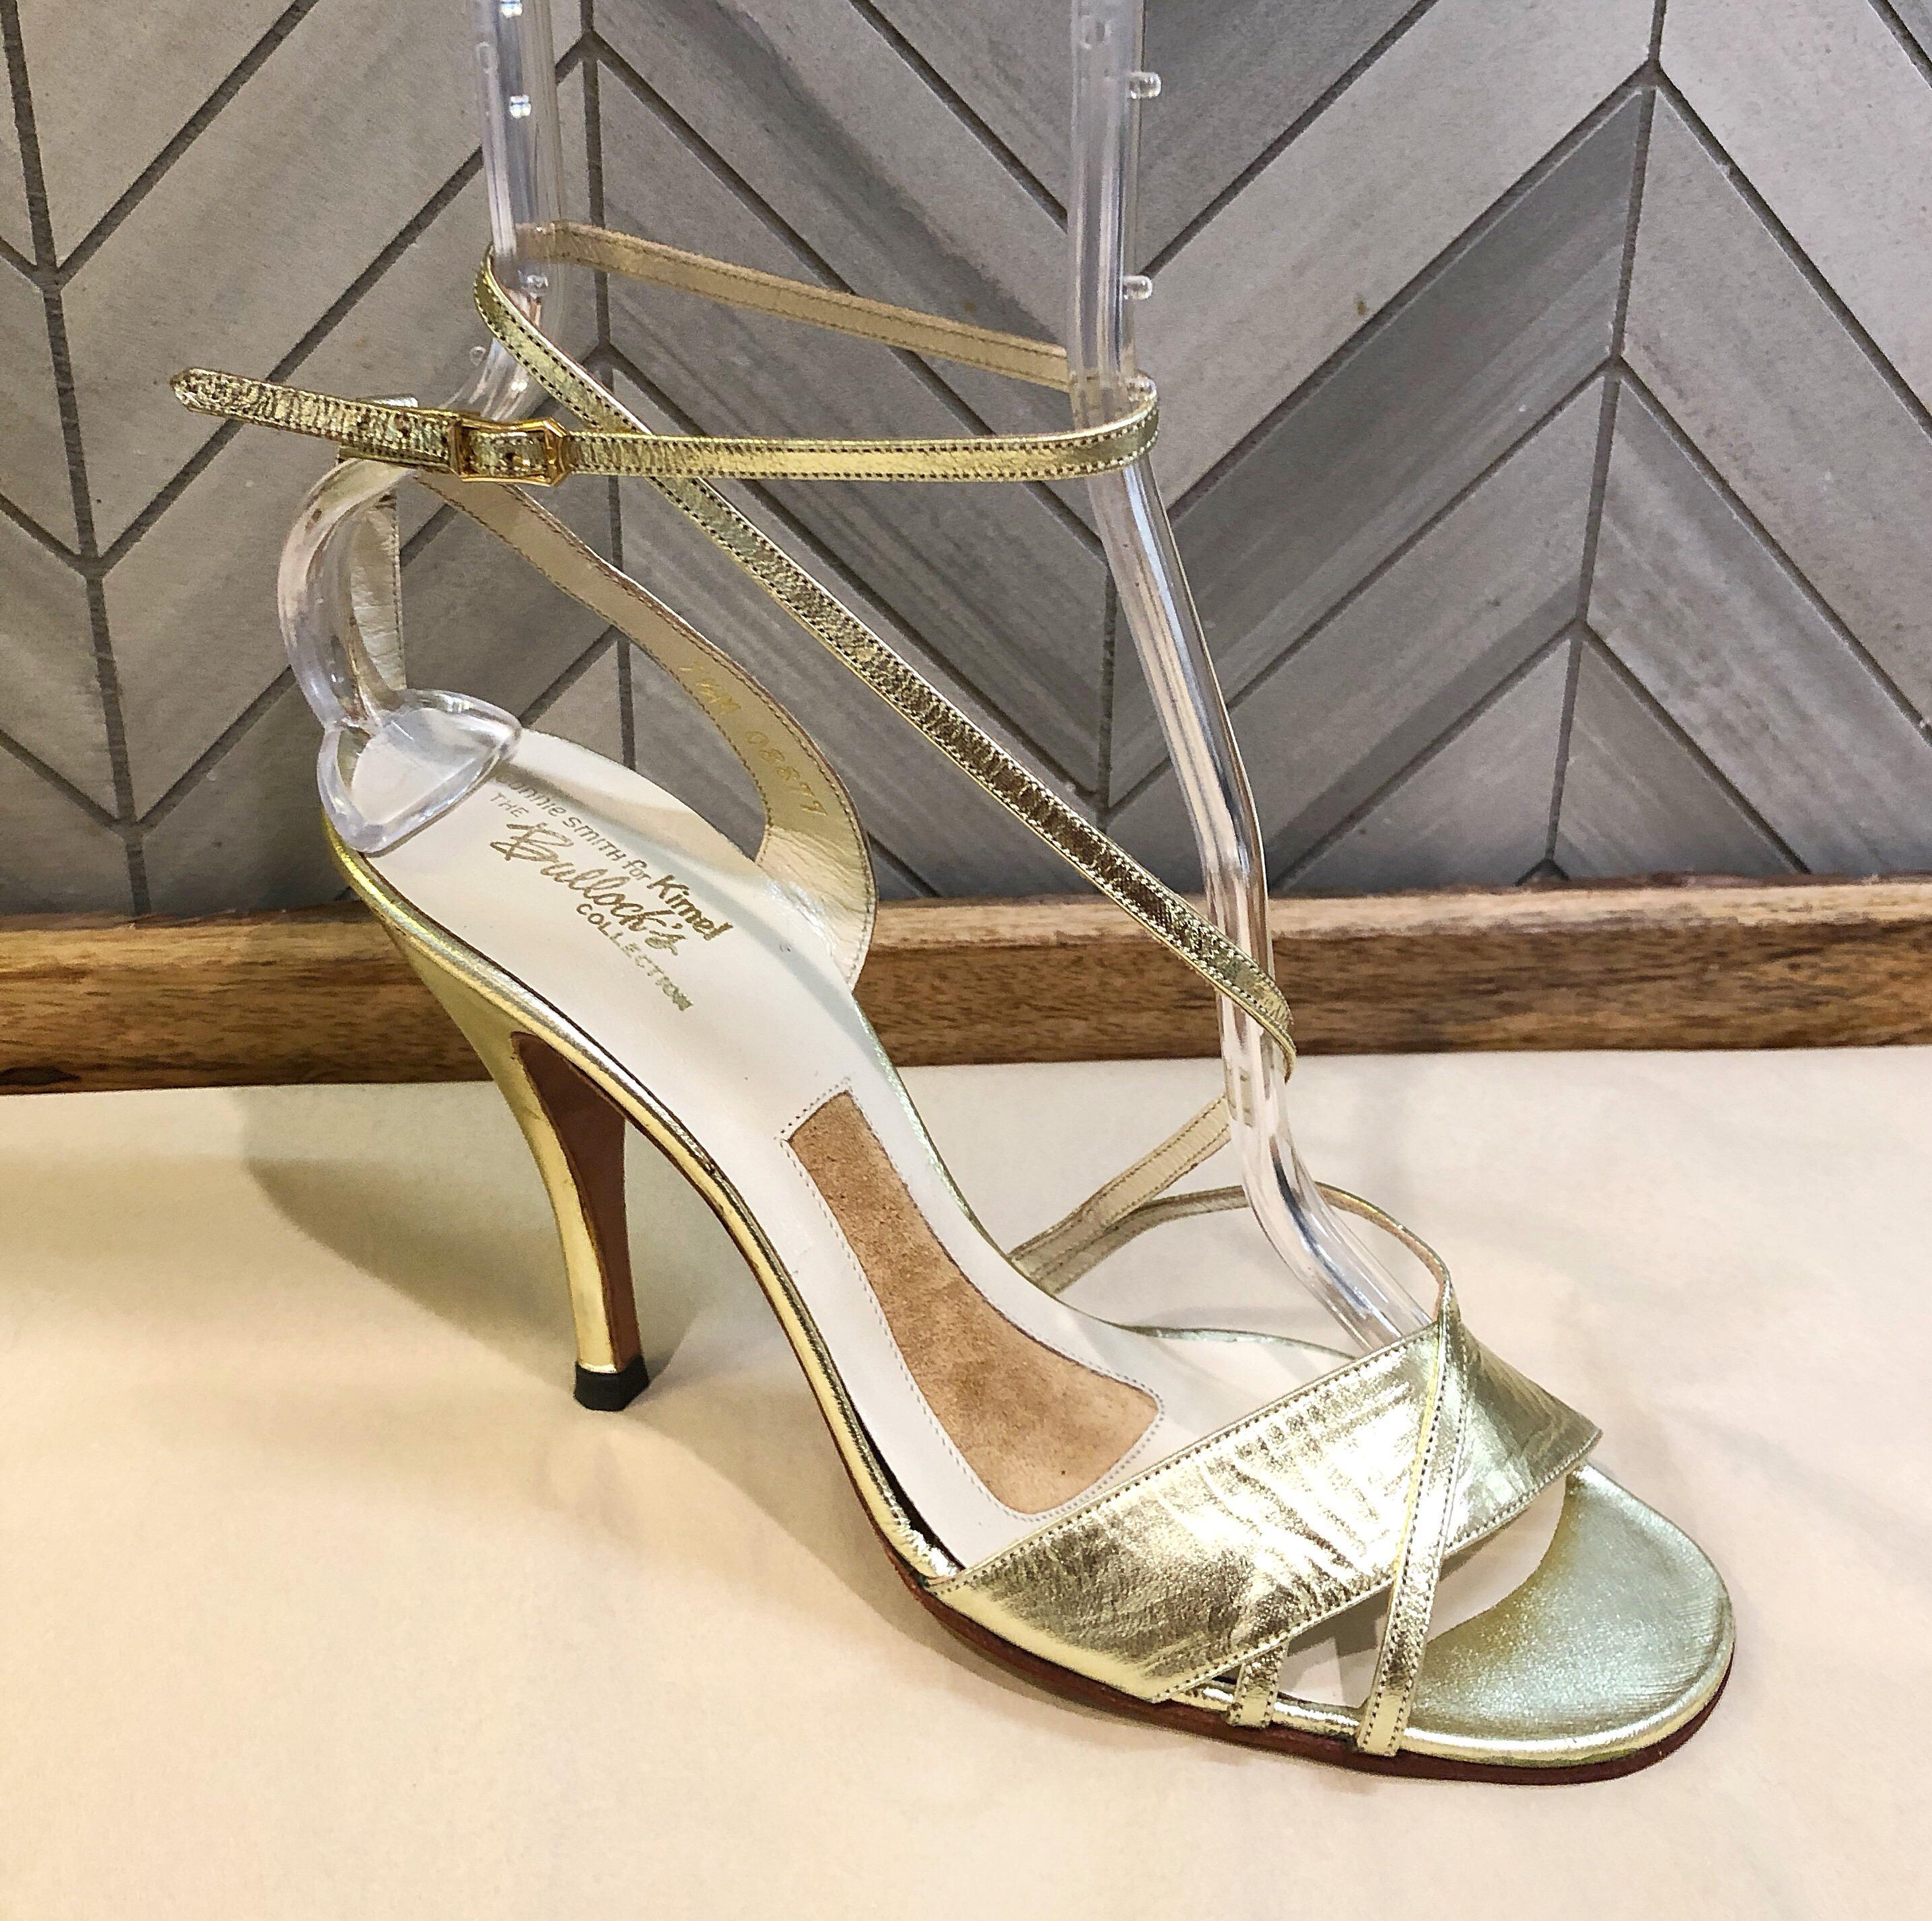 Sexy vintage never worn CONNIE SMITH for KIMMEL at BULLOCK'S WILSHIRE gold metallic Size 7.5 strappy sandals / high heels! Gold metallic leather adds just the right amount of splash to any outfit. Adjustable ankle strap. Great with jeans or a dress.